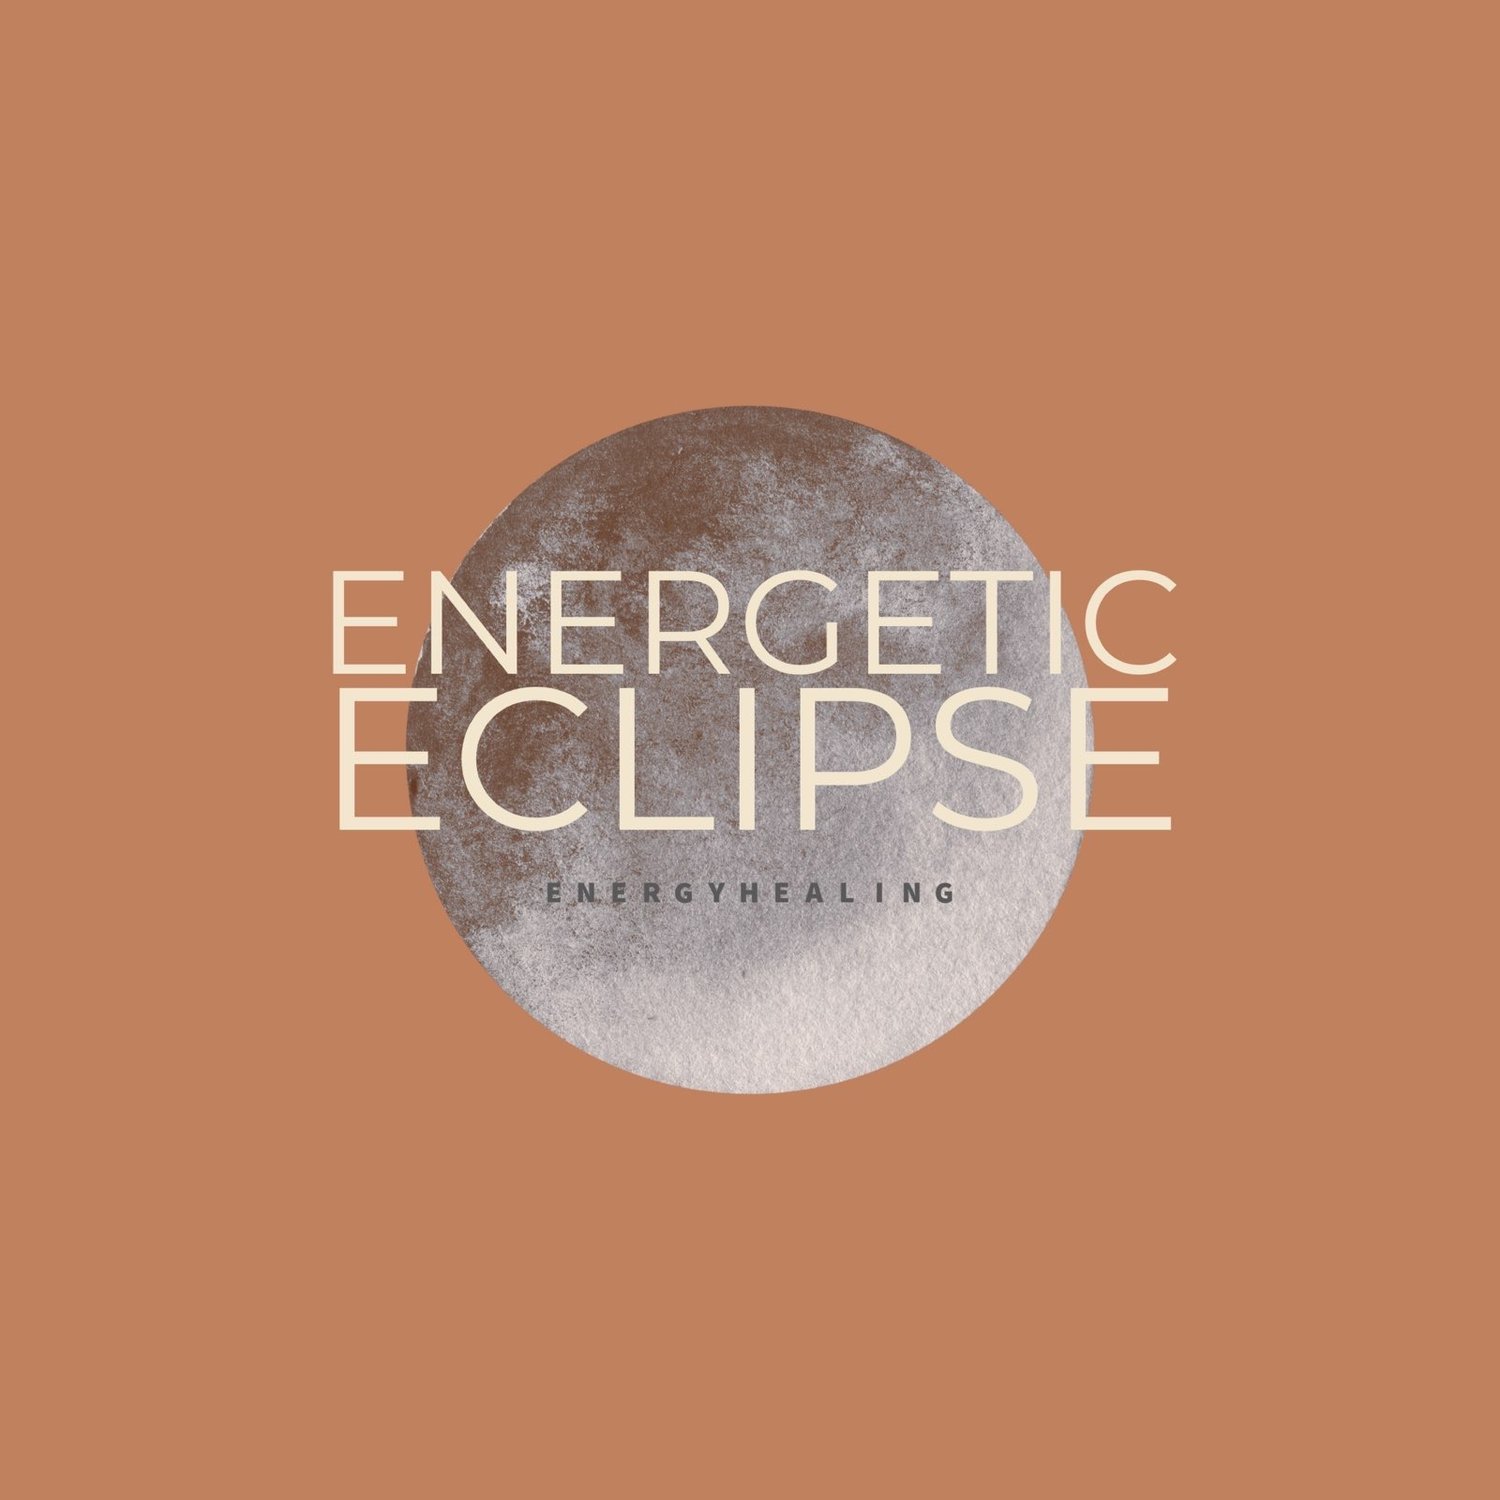 Energetic Eclipse